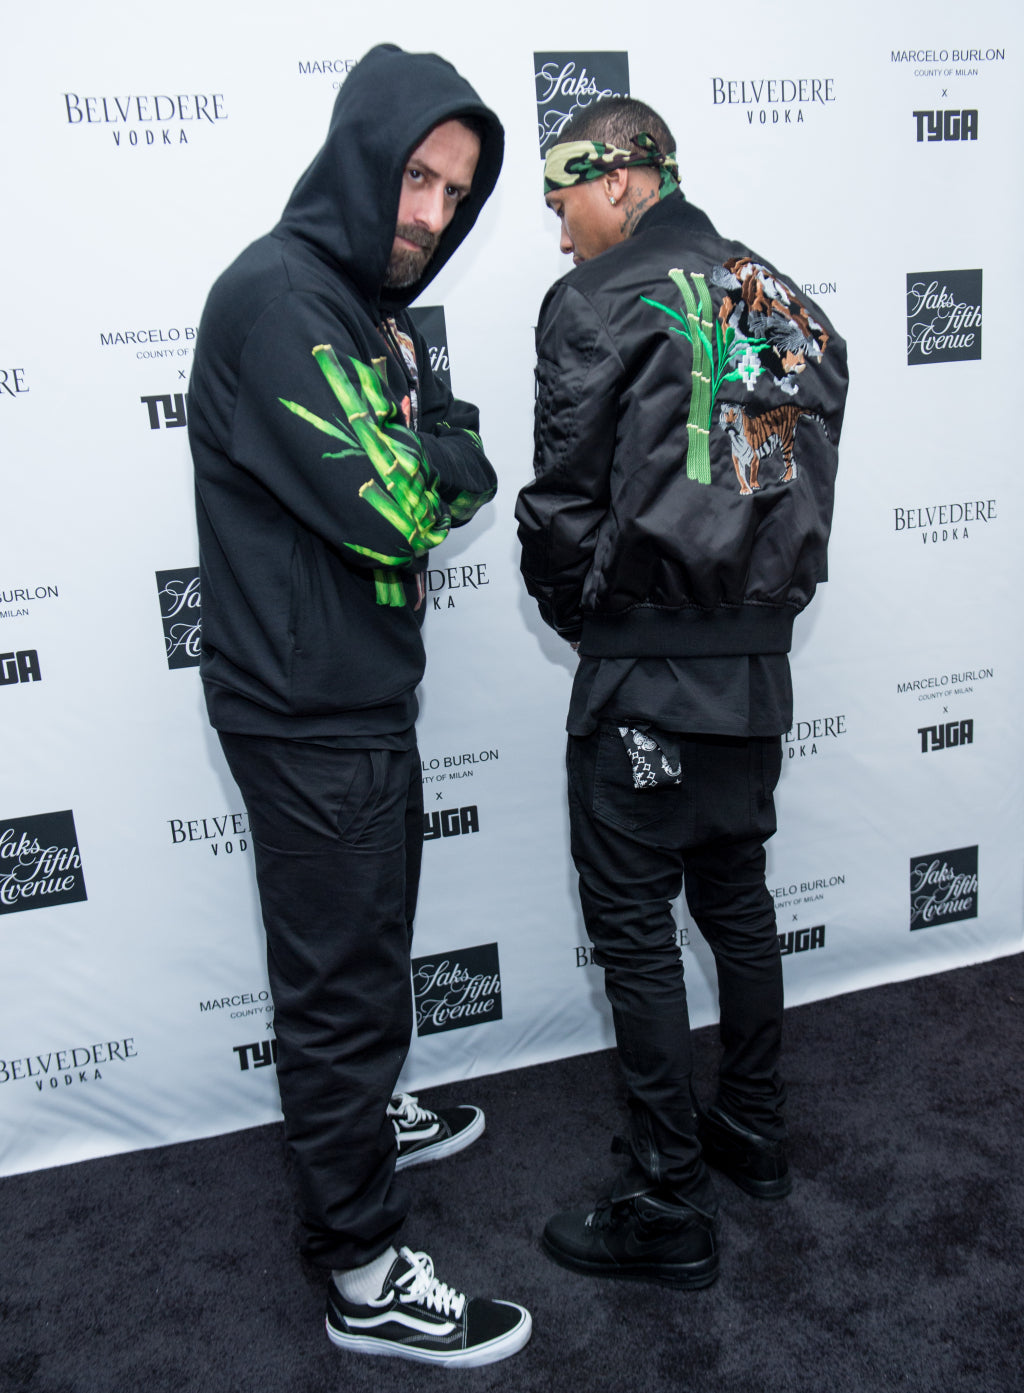 MARCELO BURLON & TYGA HIT NYC LAST NIGHT FOR THE LAUNCH OF THEIR CAPSULE COLLECTION.